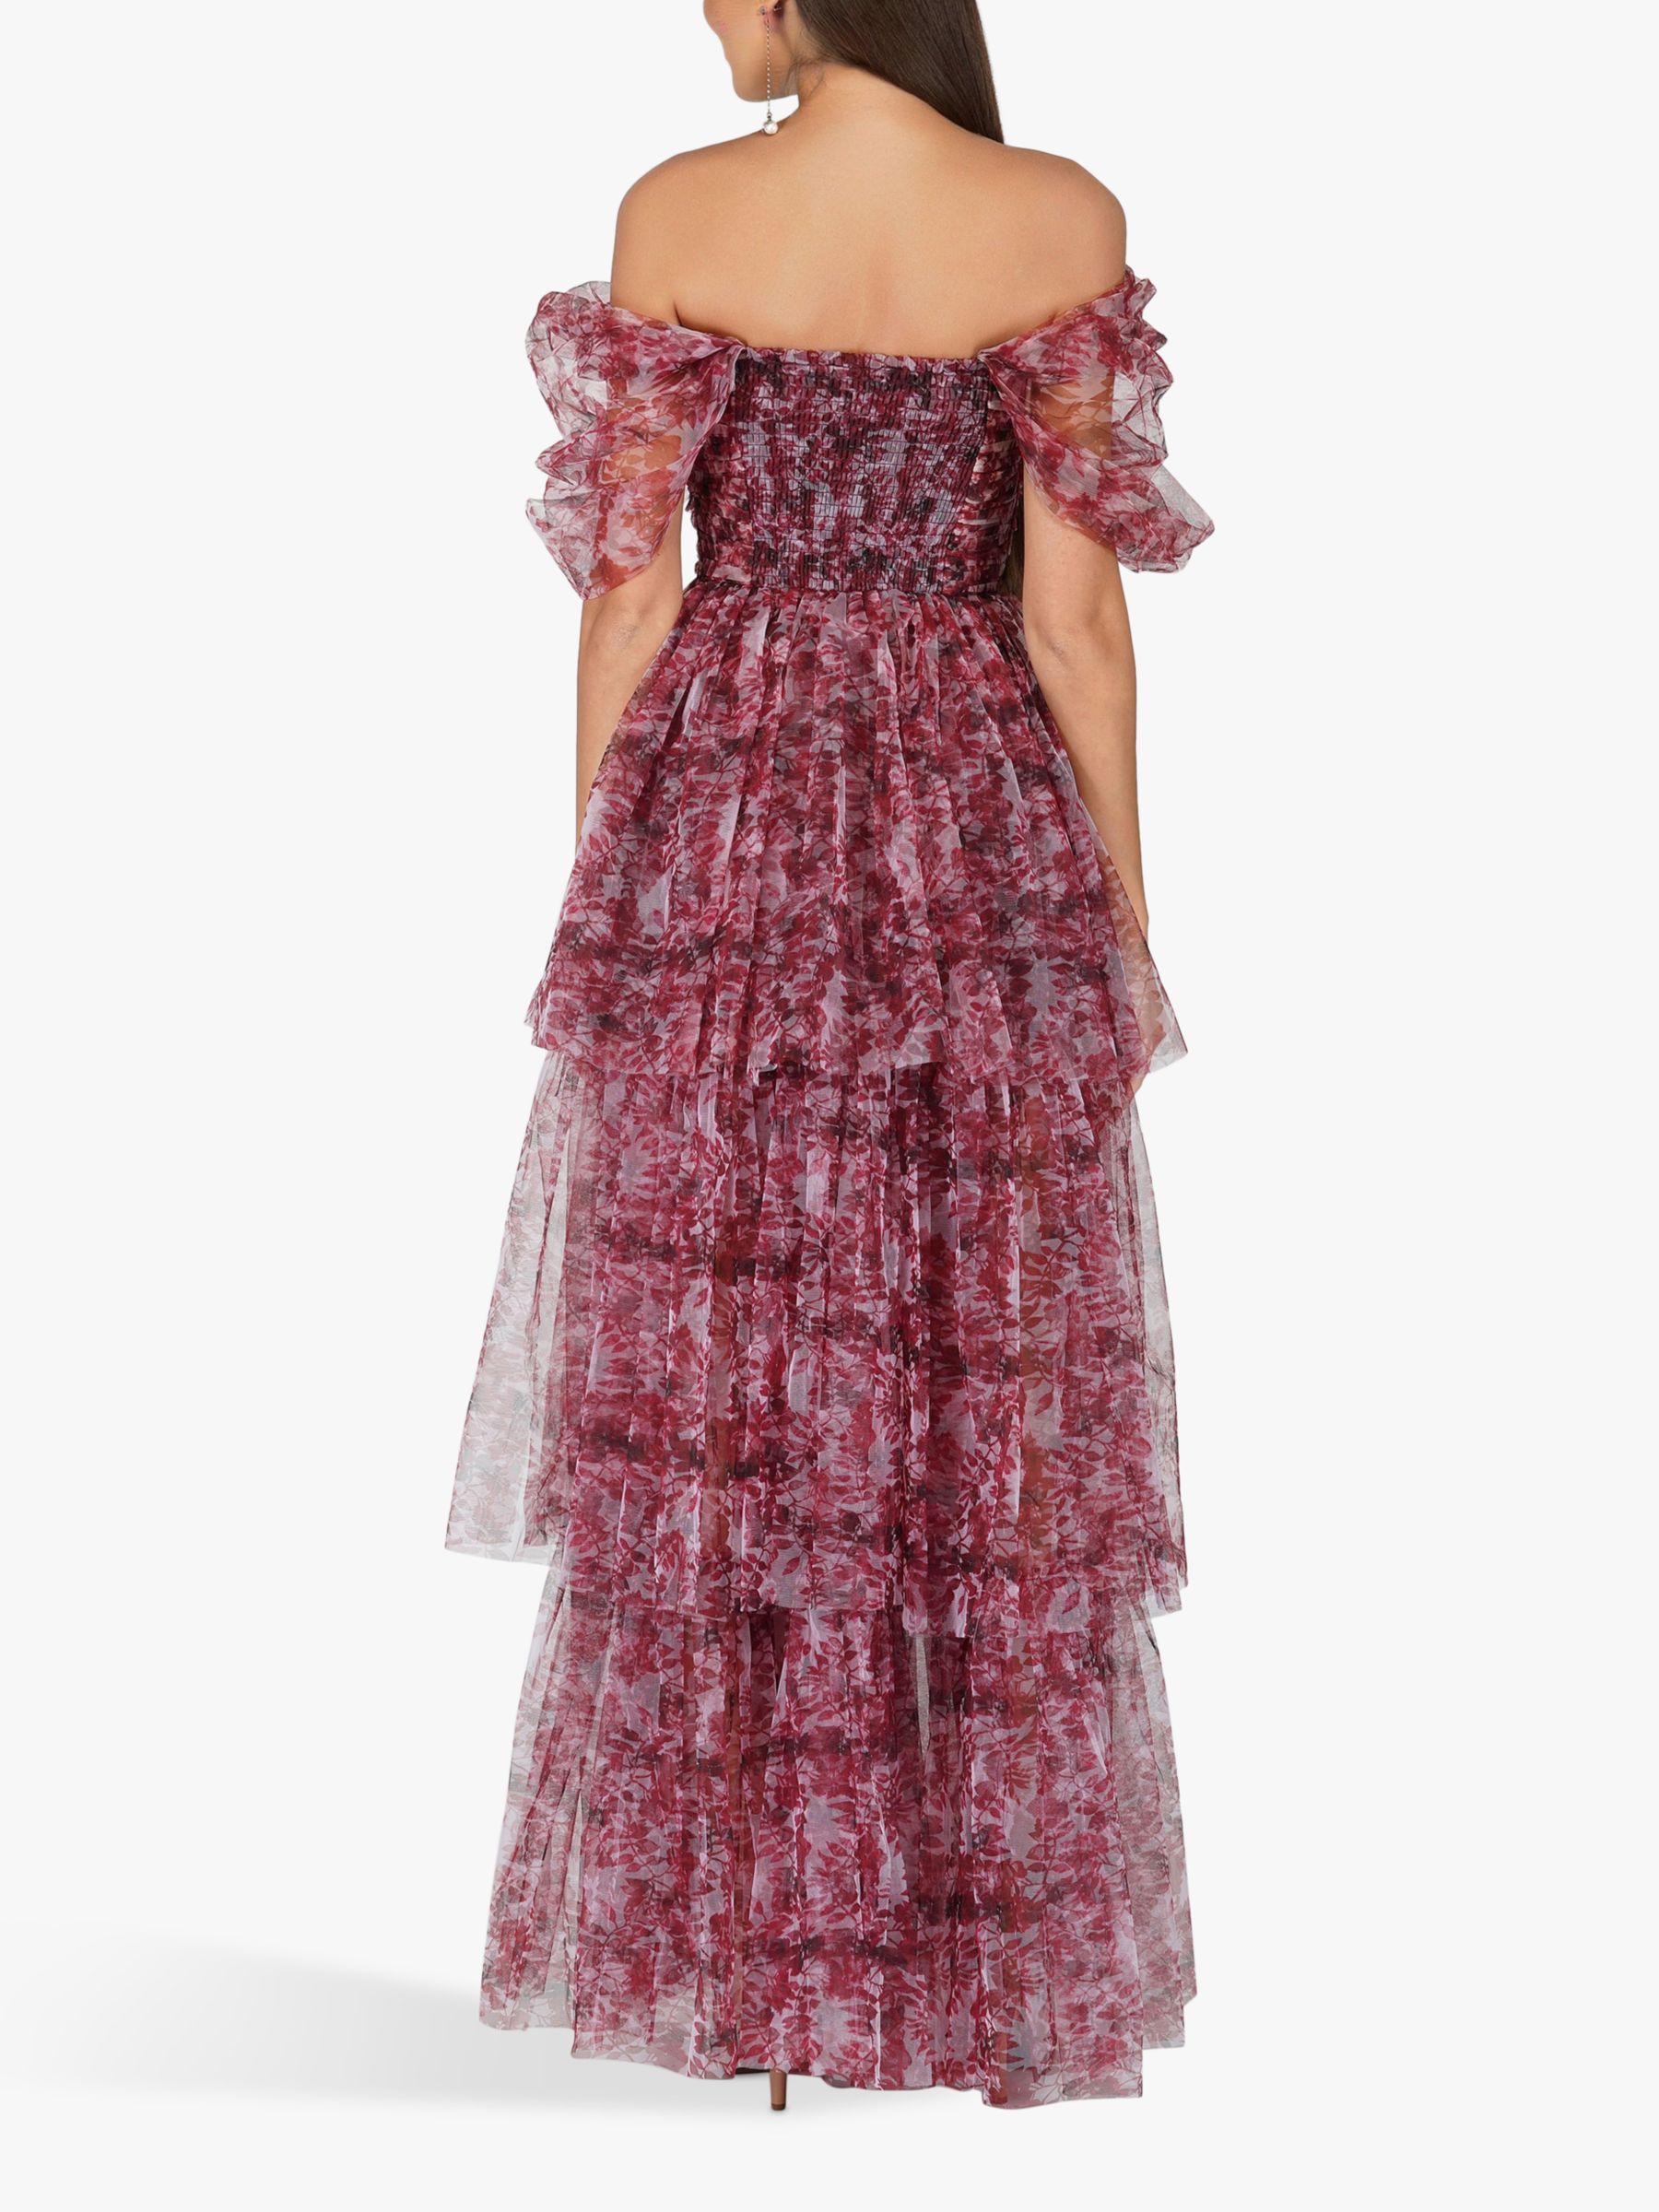 Buy Lace & Beads Sydney Tulle Tiered Maxi Dress, Burgundy Print Online at johnlewis.com